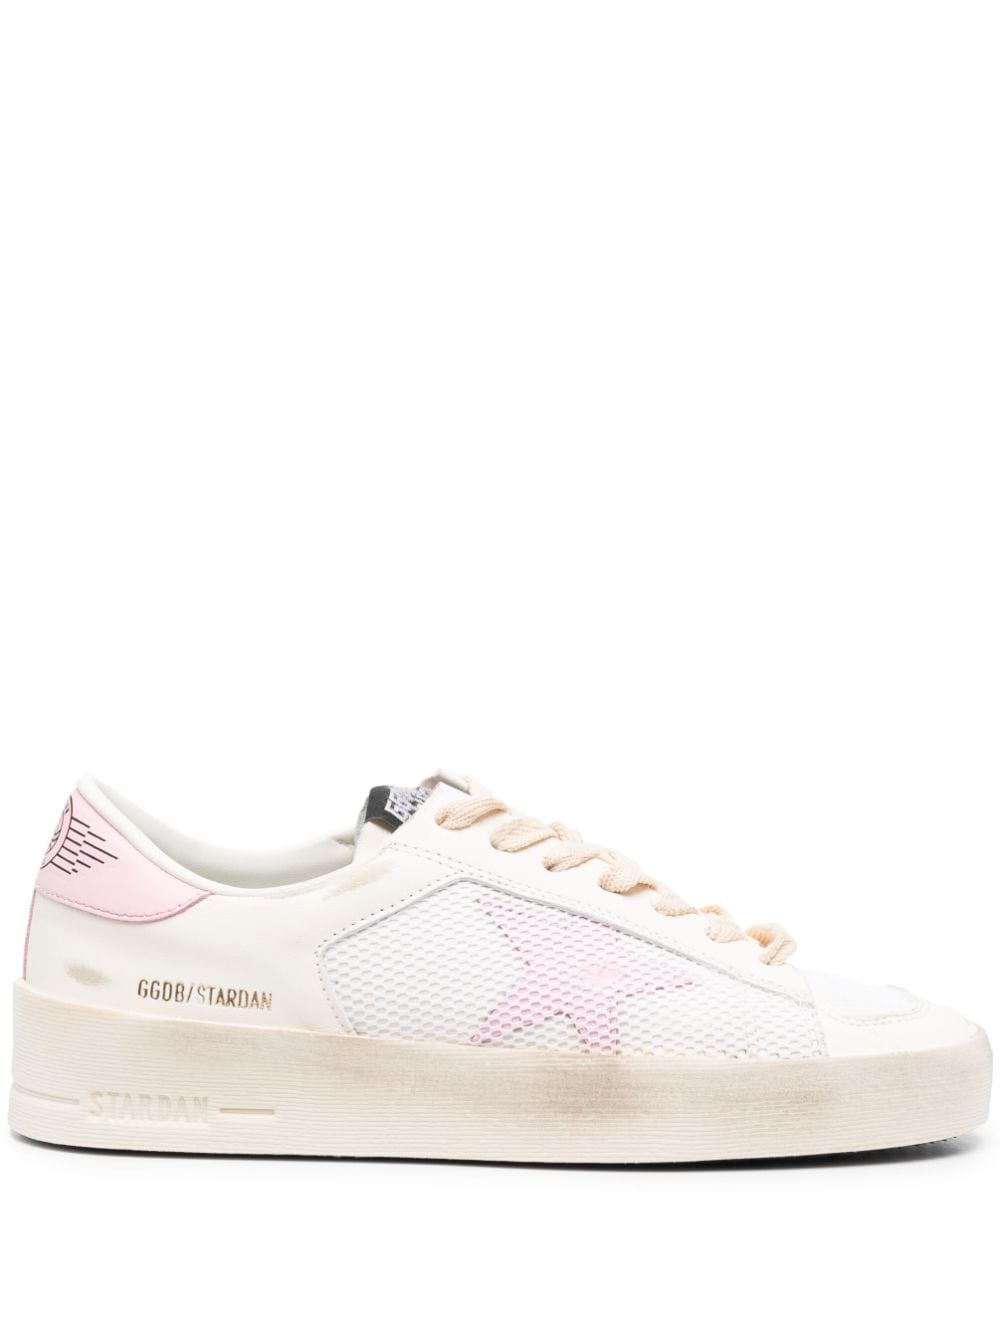 GOLDEN GOOSE Light Pink Distressed Leather Sneaker for Women - FW23 Collection